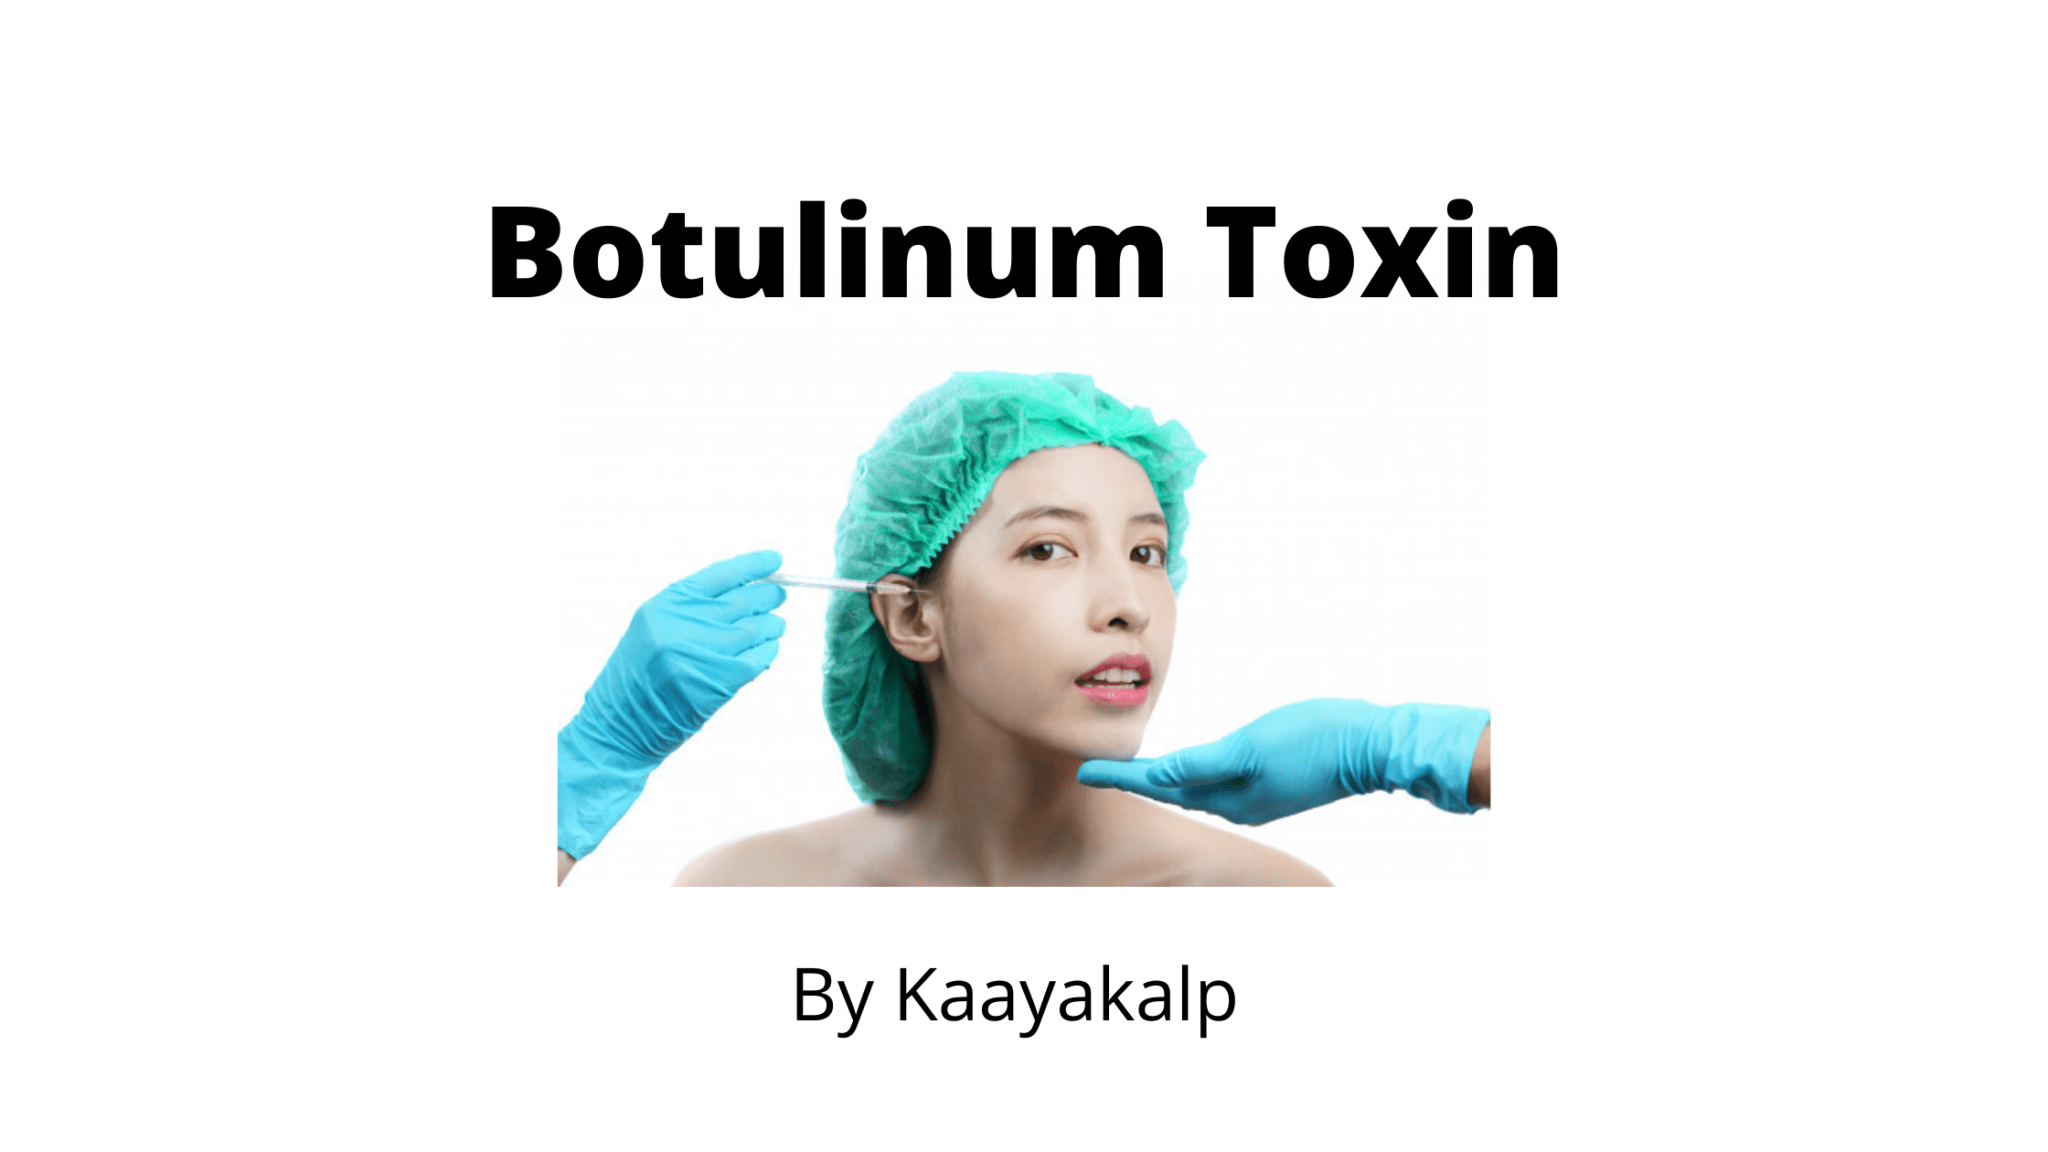 All about Botulinum Toxin